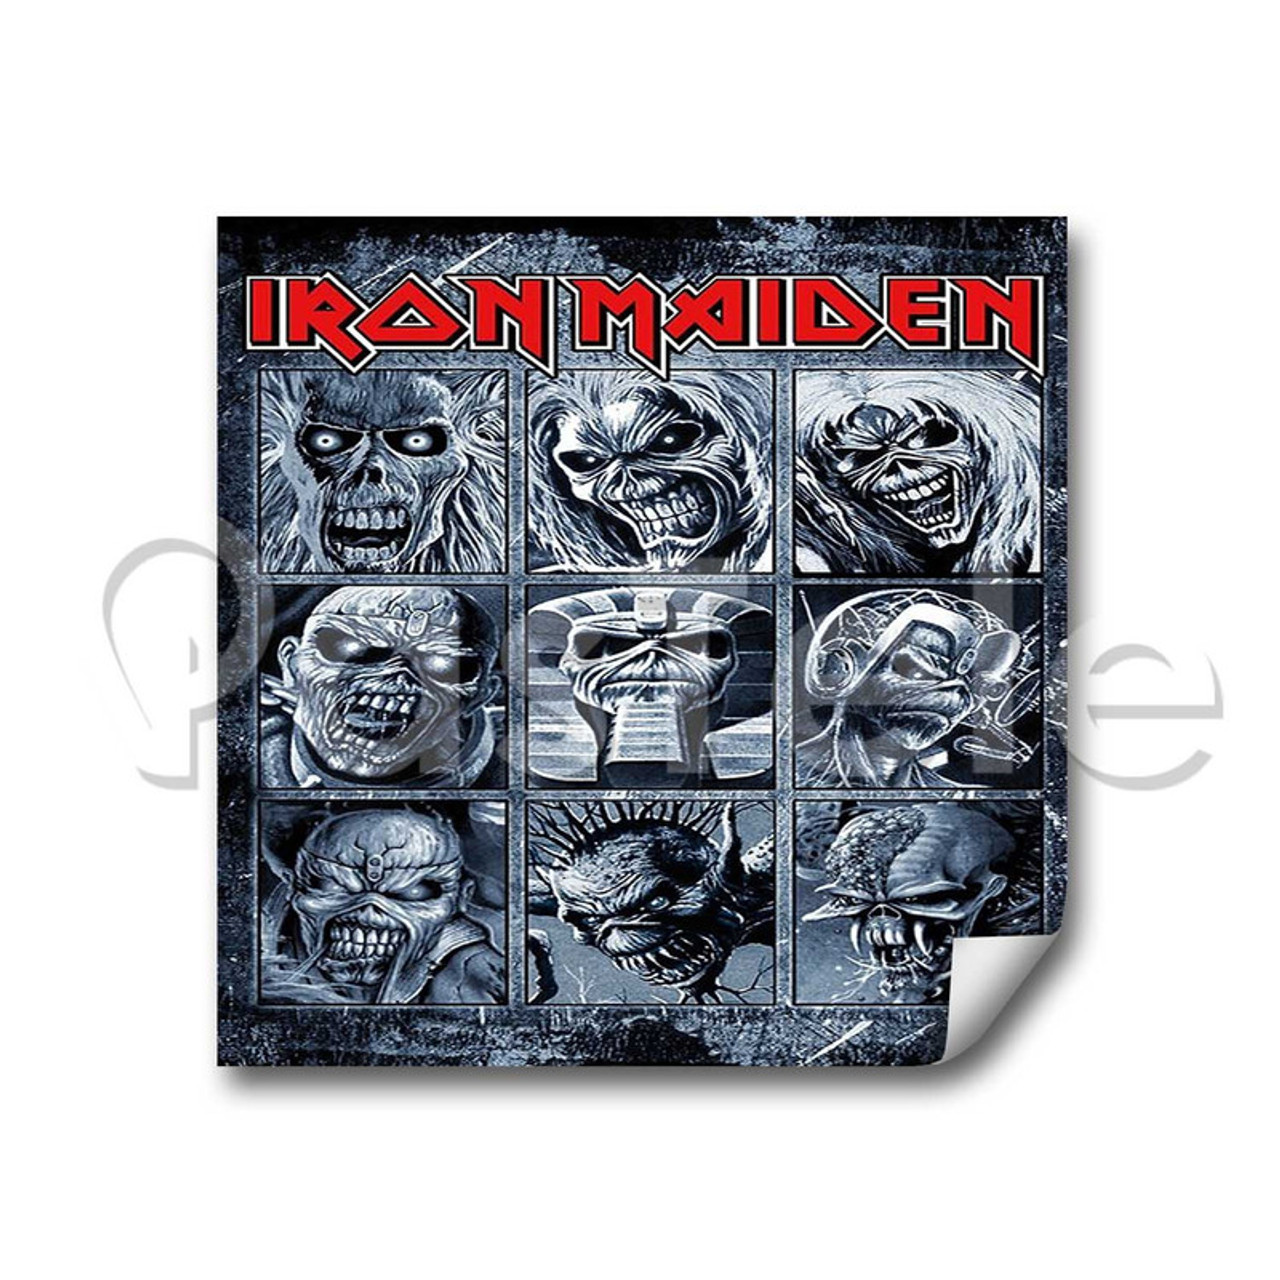 The Many Faces Of Iron Maiden Vinilo Doble Color